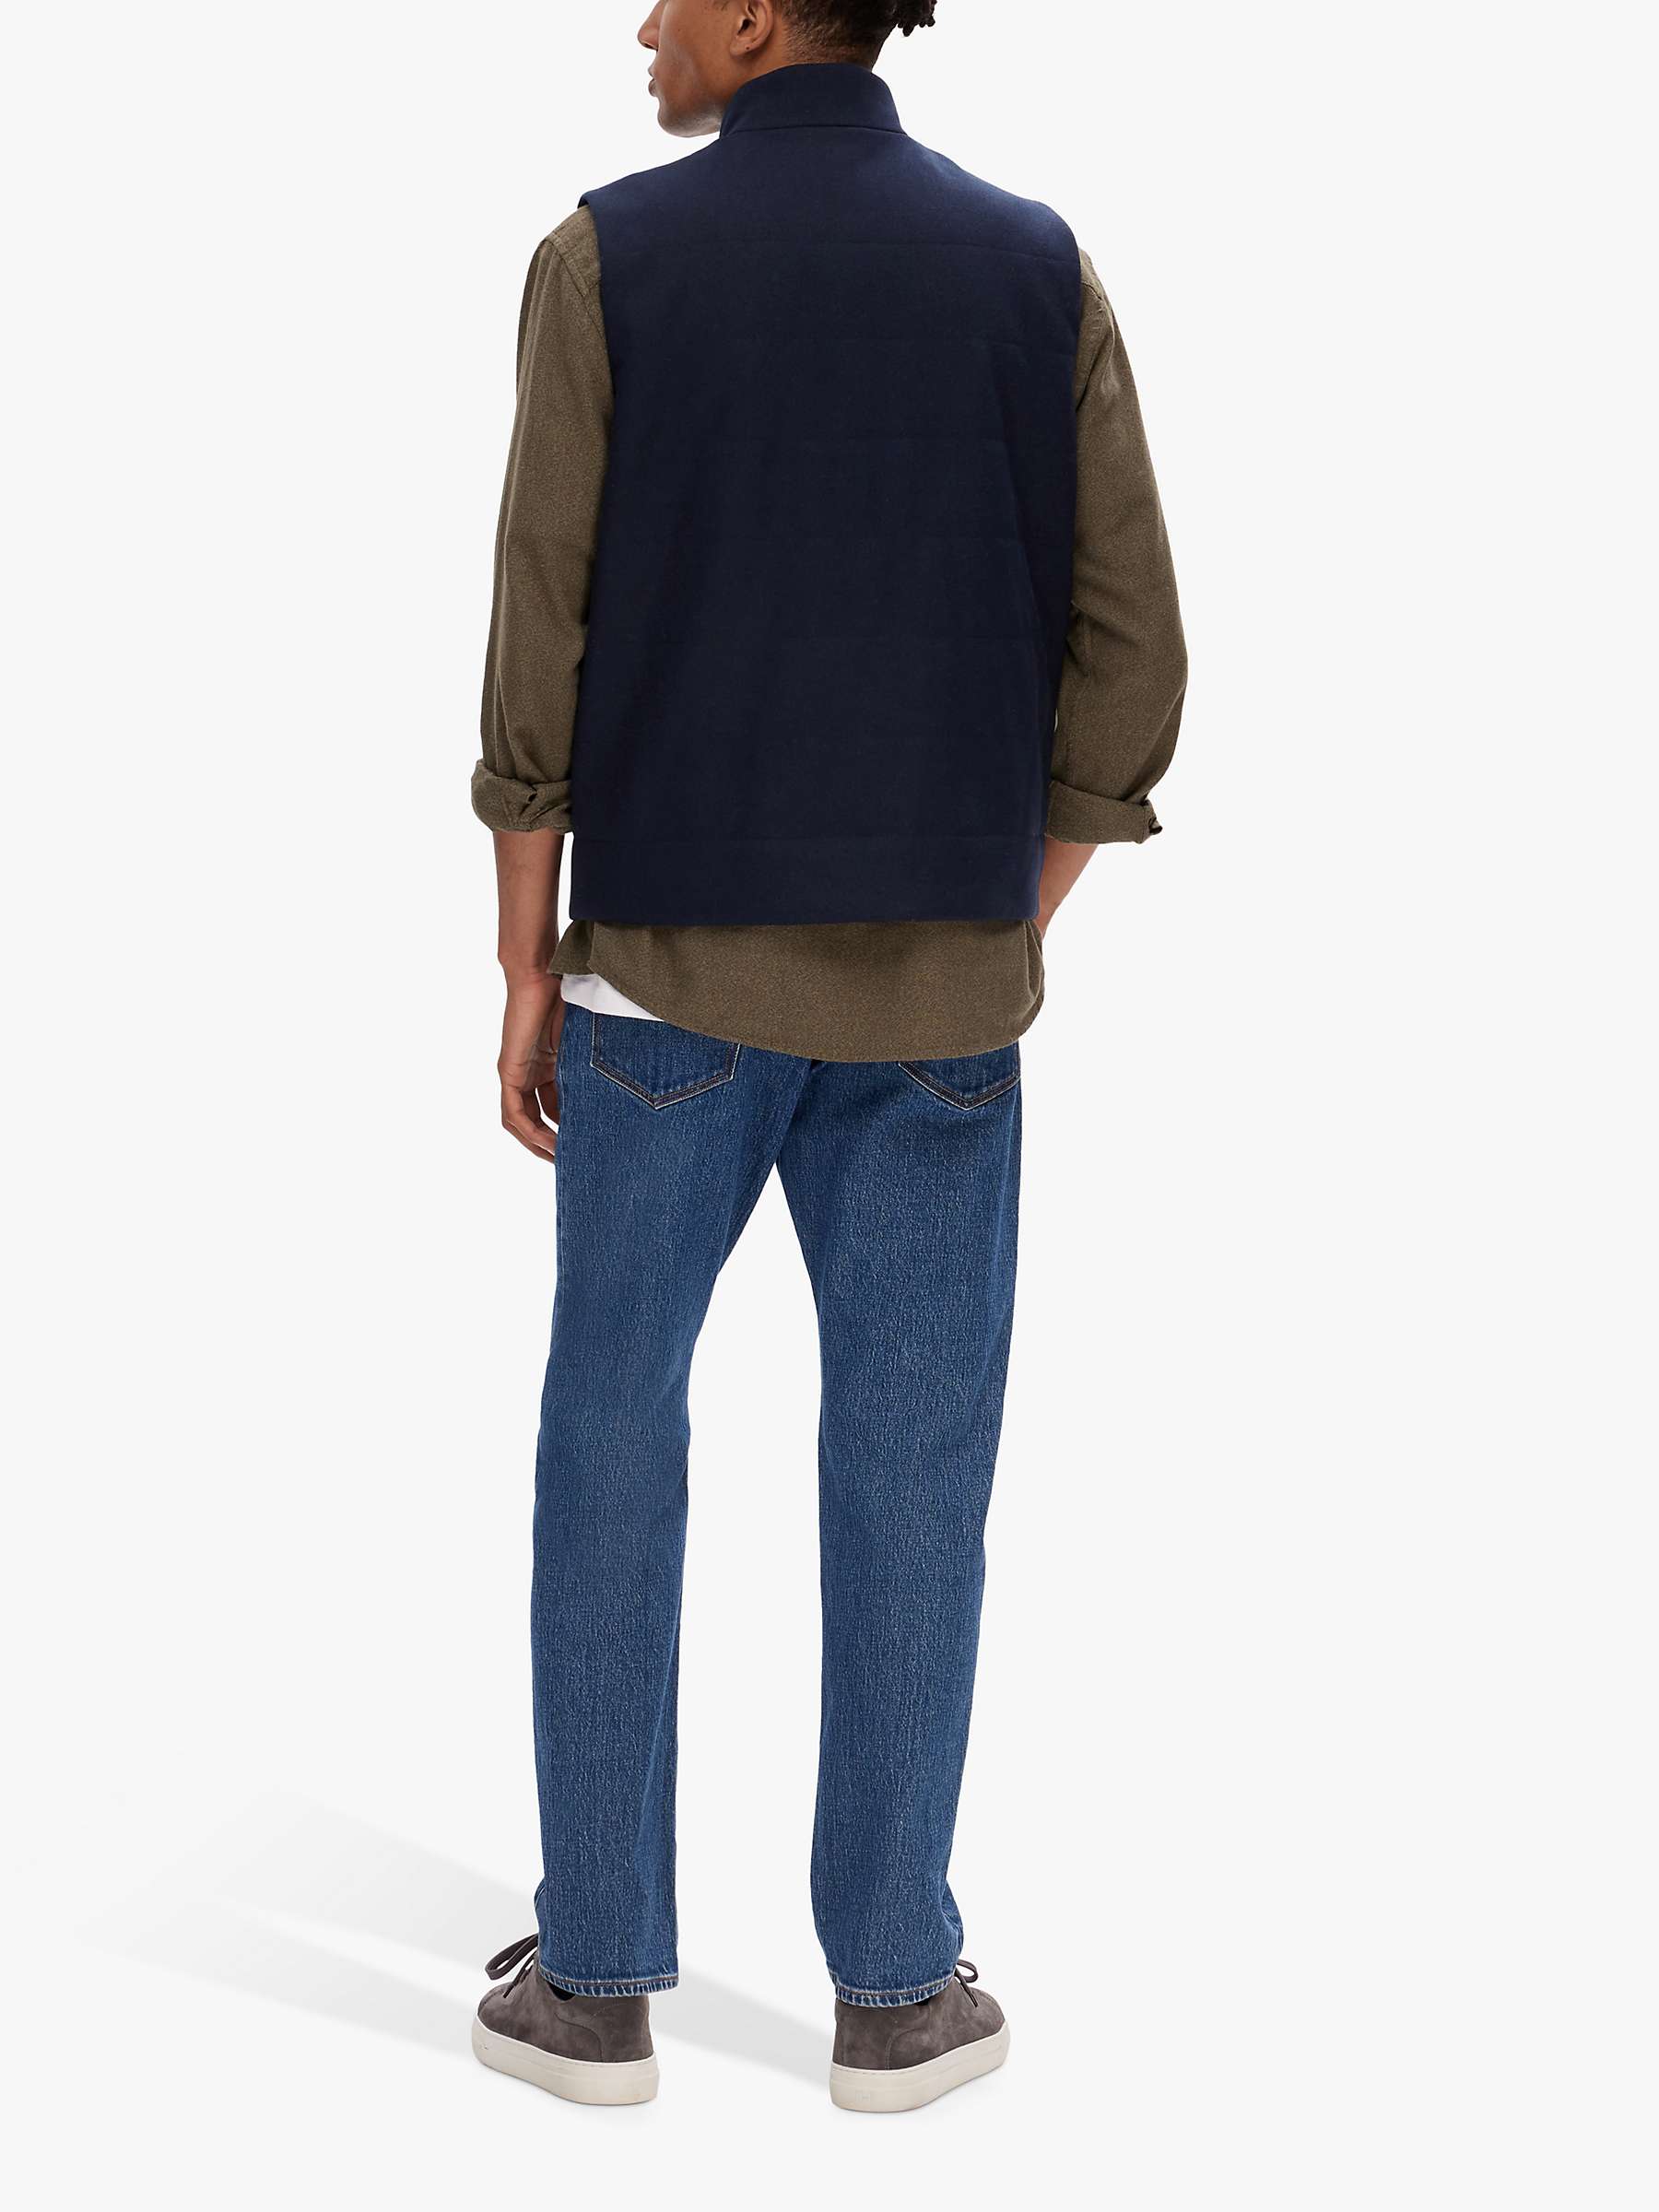 Buy SELECTED HOMME Padded Gilet, Navy Online at johnlewis.com